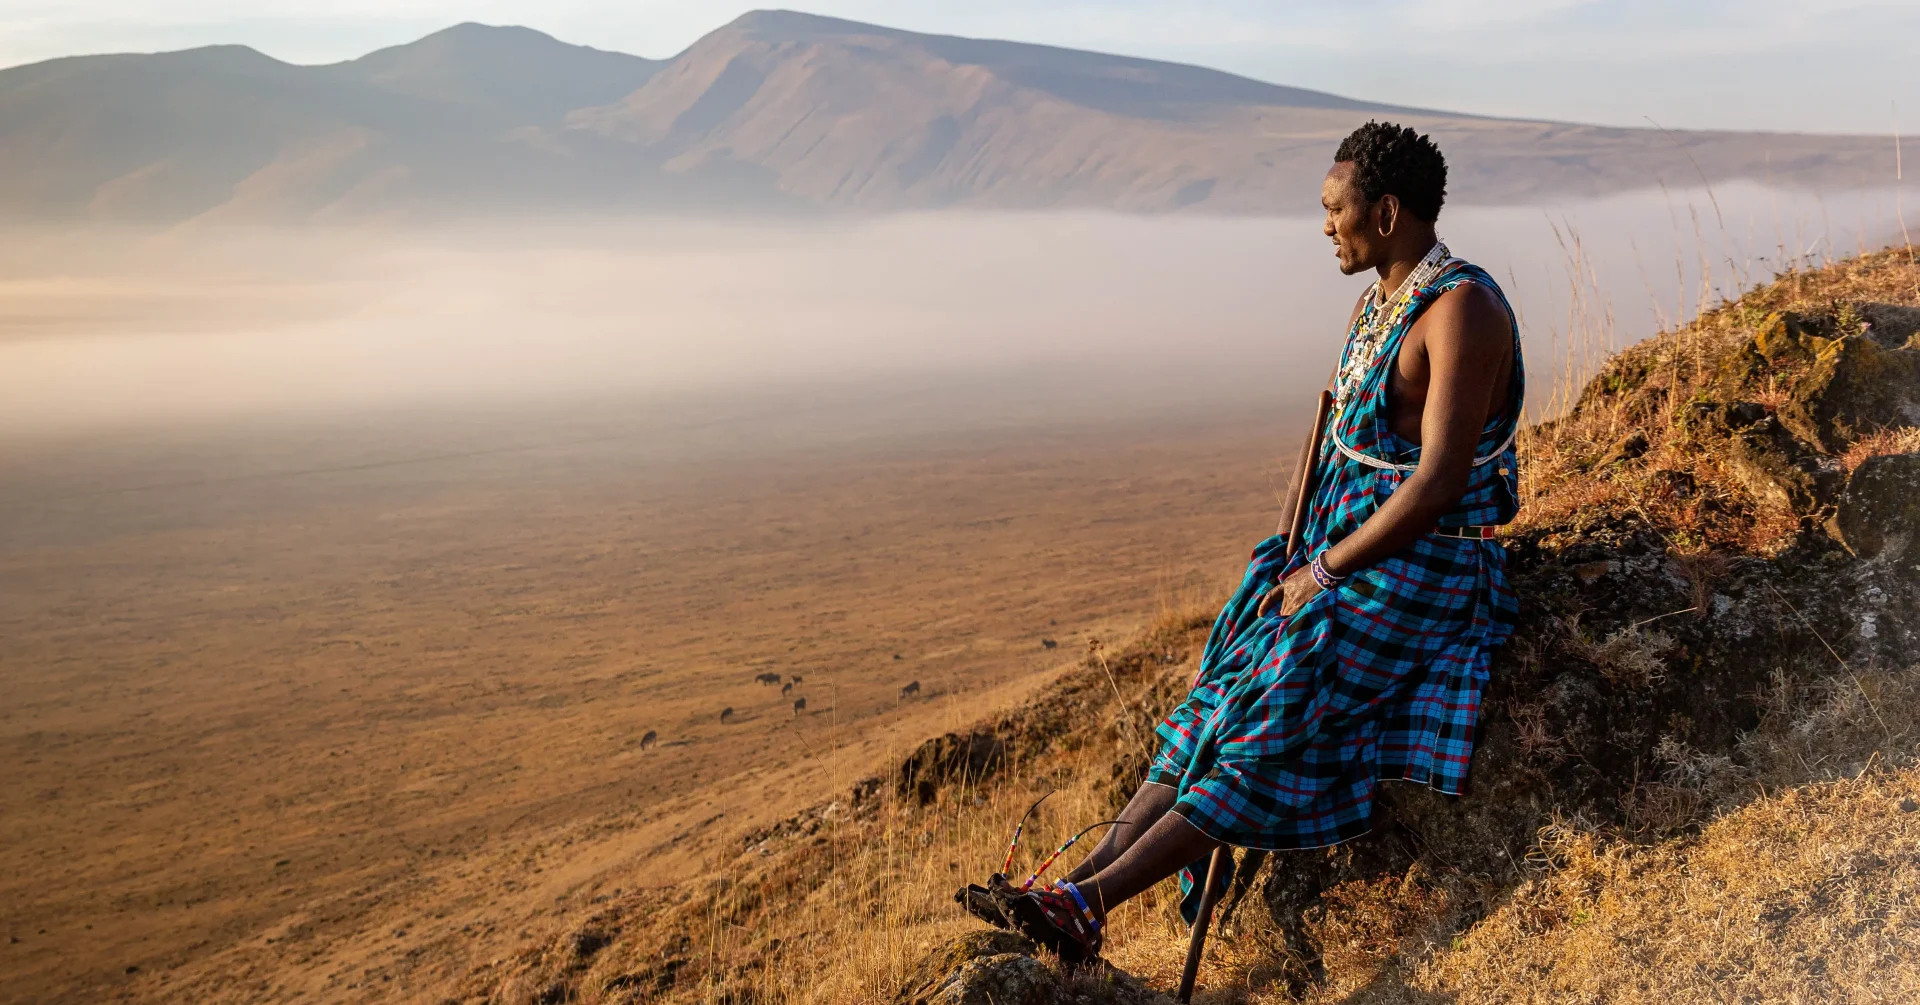 A Wayfairer Response: The Displacement of the Maasai People